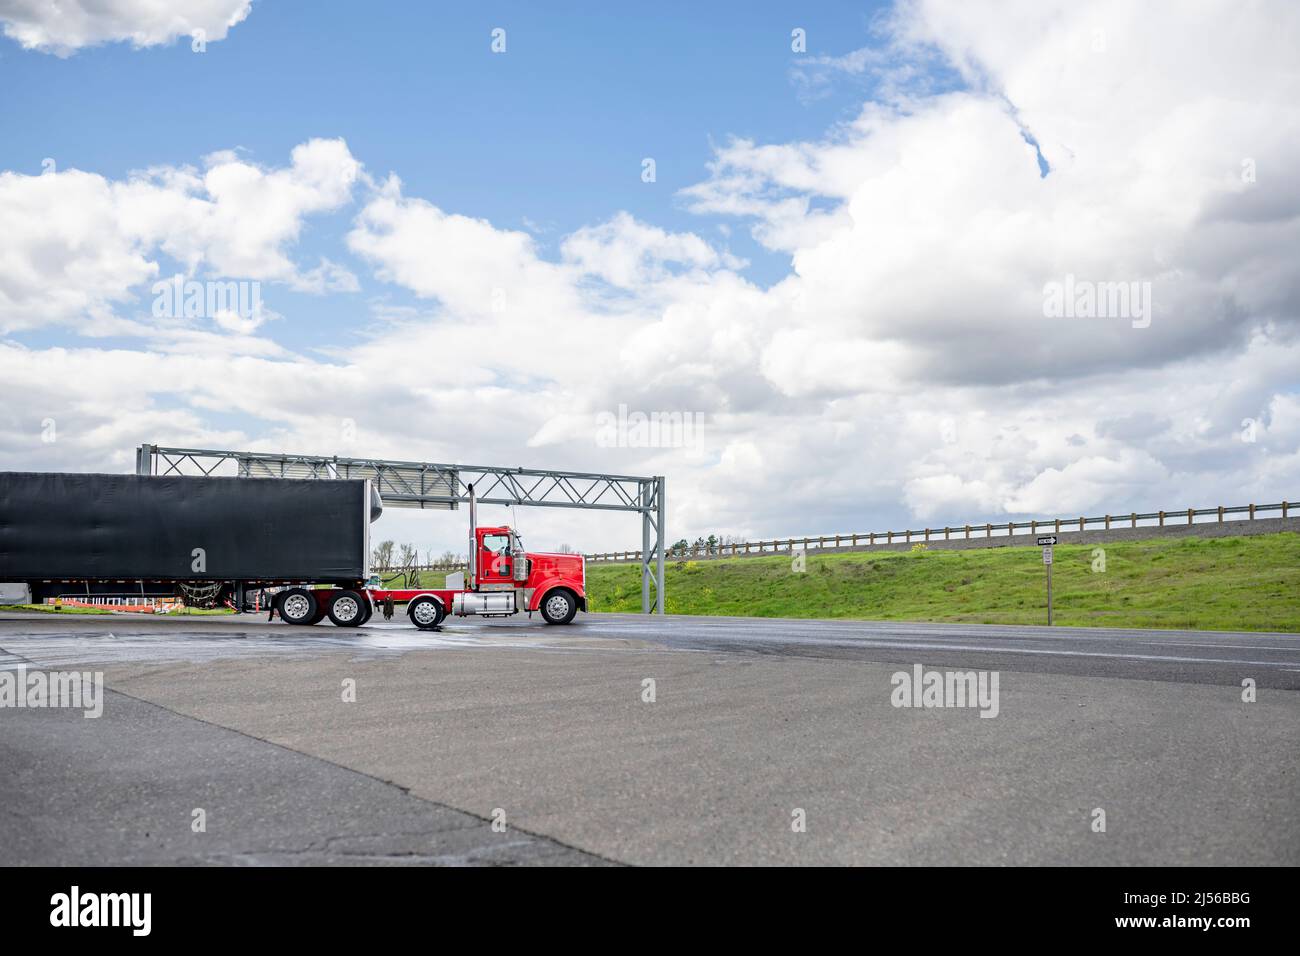 Long haul professional classic industrial standard red big rig semi truck tractor with loaded dry van semi trailer transporting commercial cargo turni Stock Photo